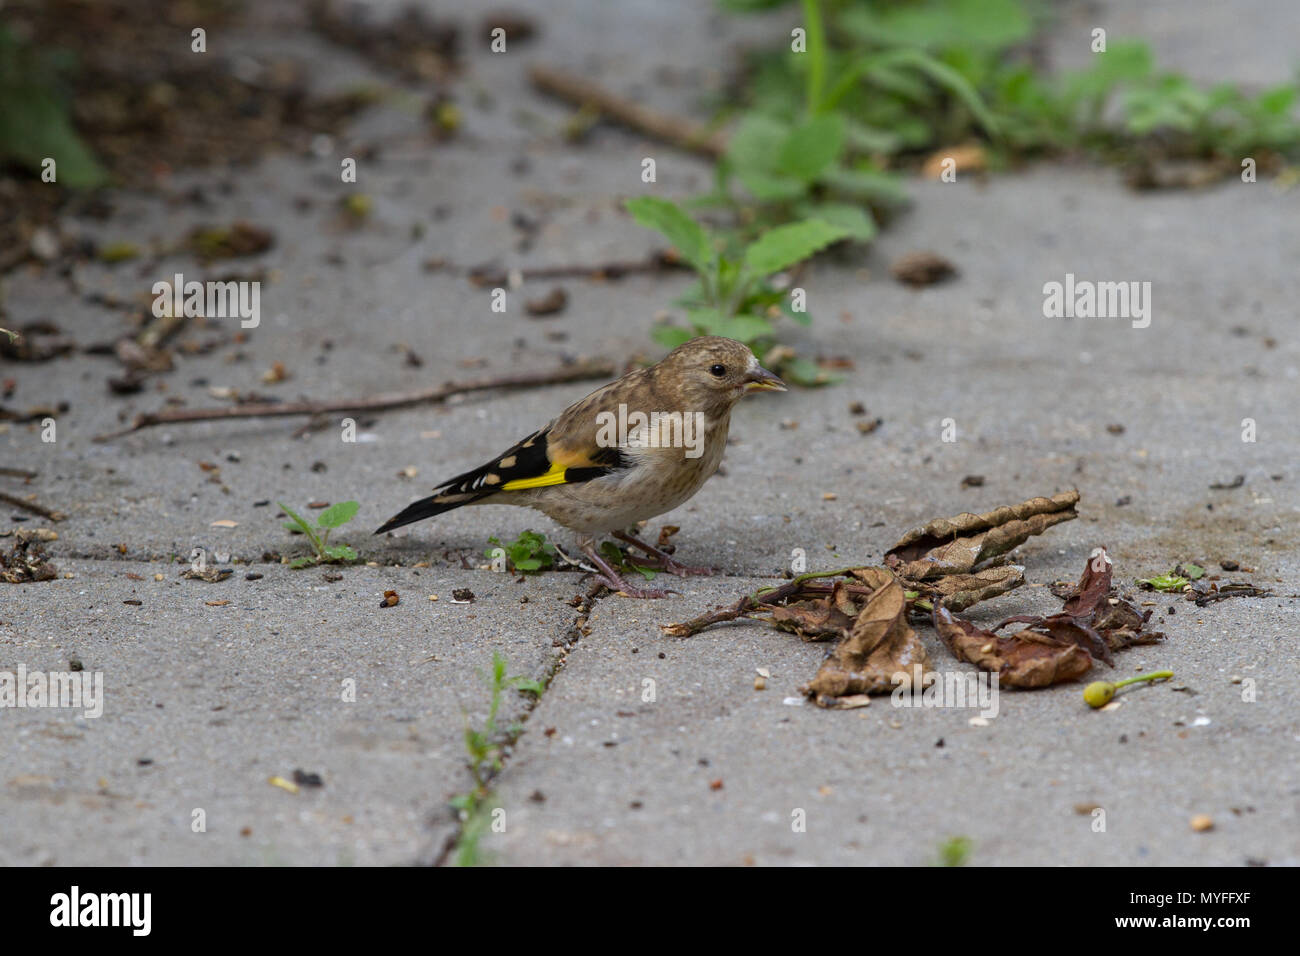 Goldfinch. Carduelis carduelis.  Single fledgling perched on ground. West Midlands.  British Isles. Stock Photo